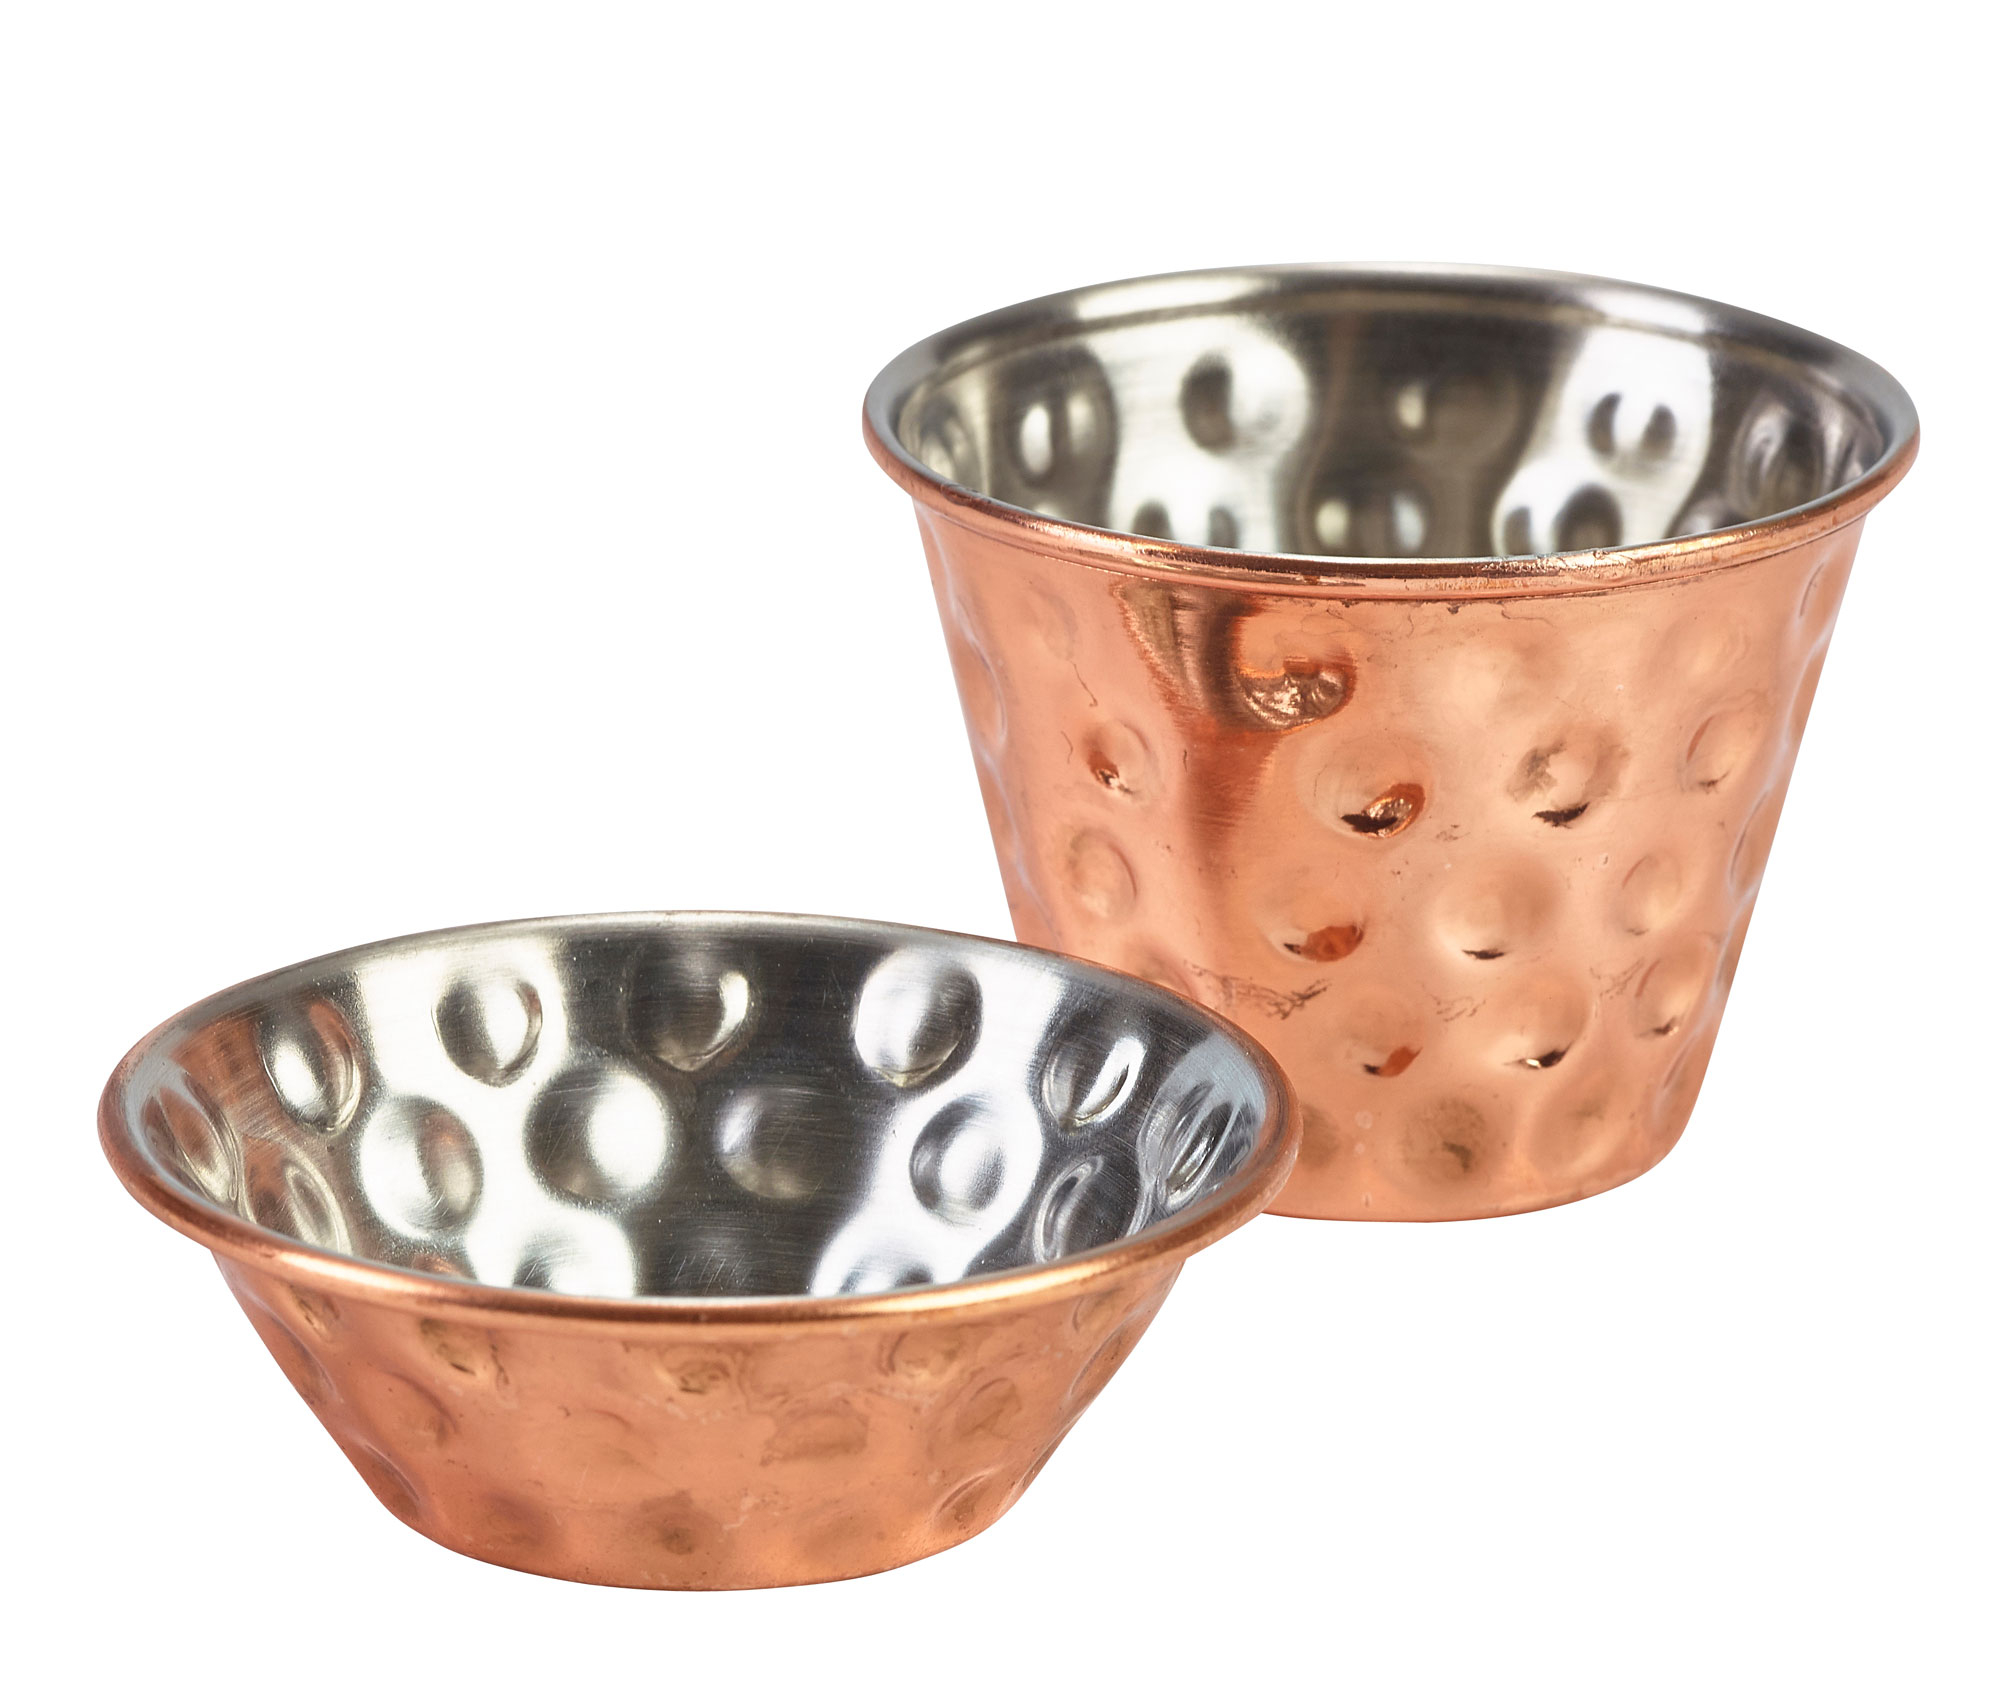 Ramekin with rolled edge, hammered stainless steel copper-colored - various sizes